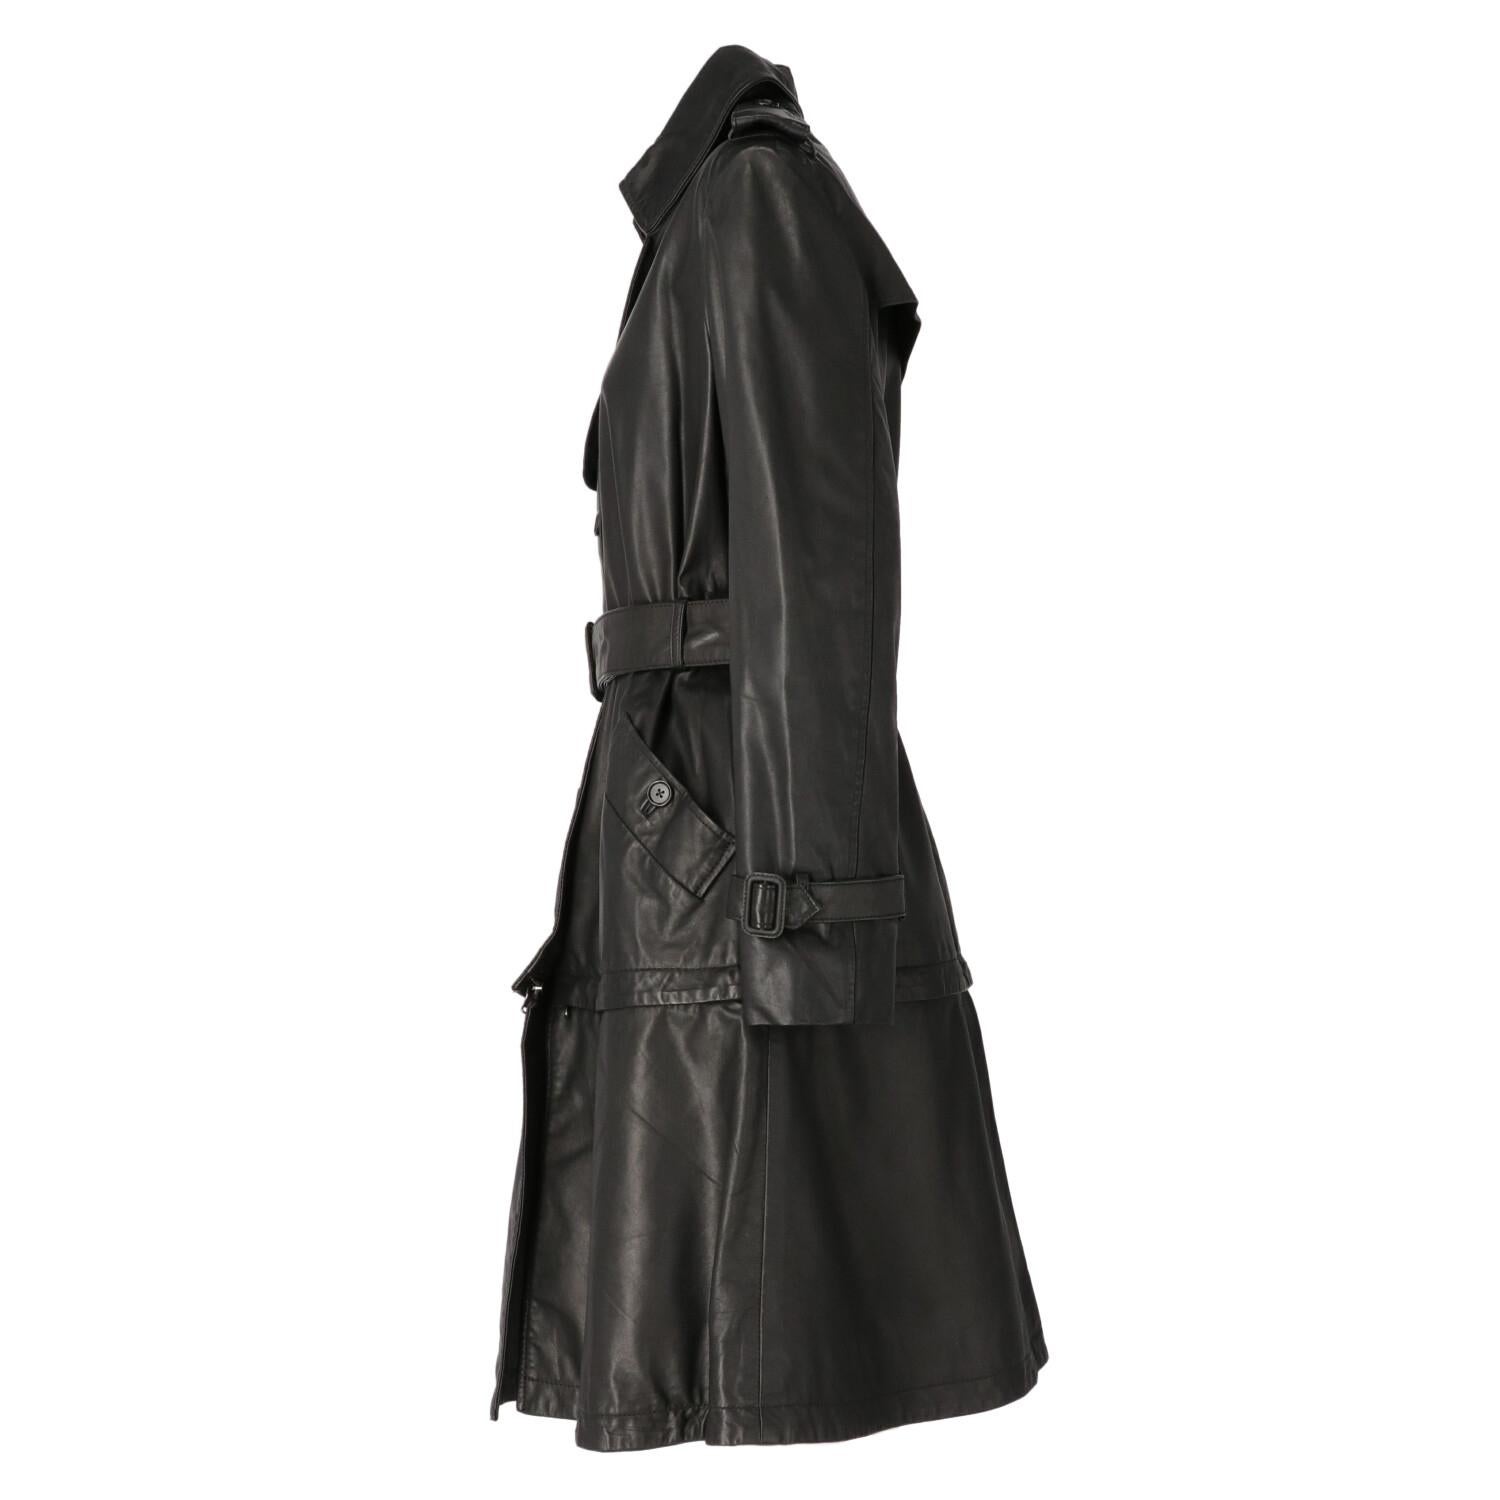 Emanuel Ungaro black leather trench coat. Classic collar, single-breasted closure with buttons and metal hooks. Windbreak flap, shoulder tabs with button, rain flap on the back. Long sleeves and cuffs with strap. Welt pockets and belt at the waist.